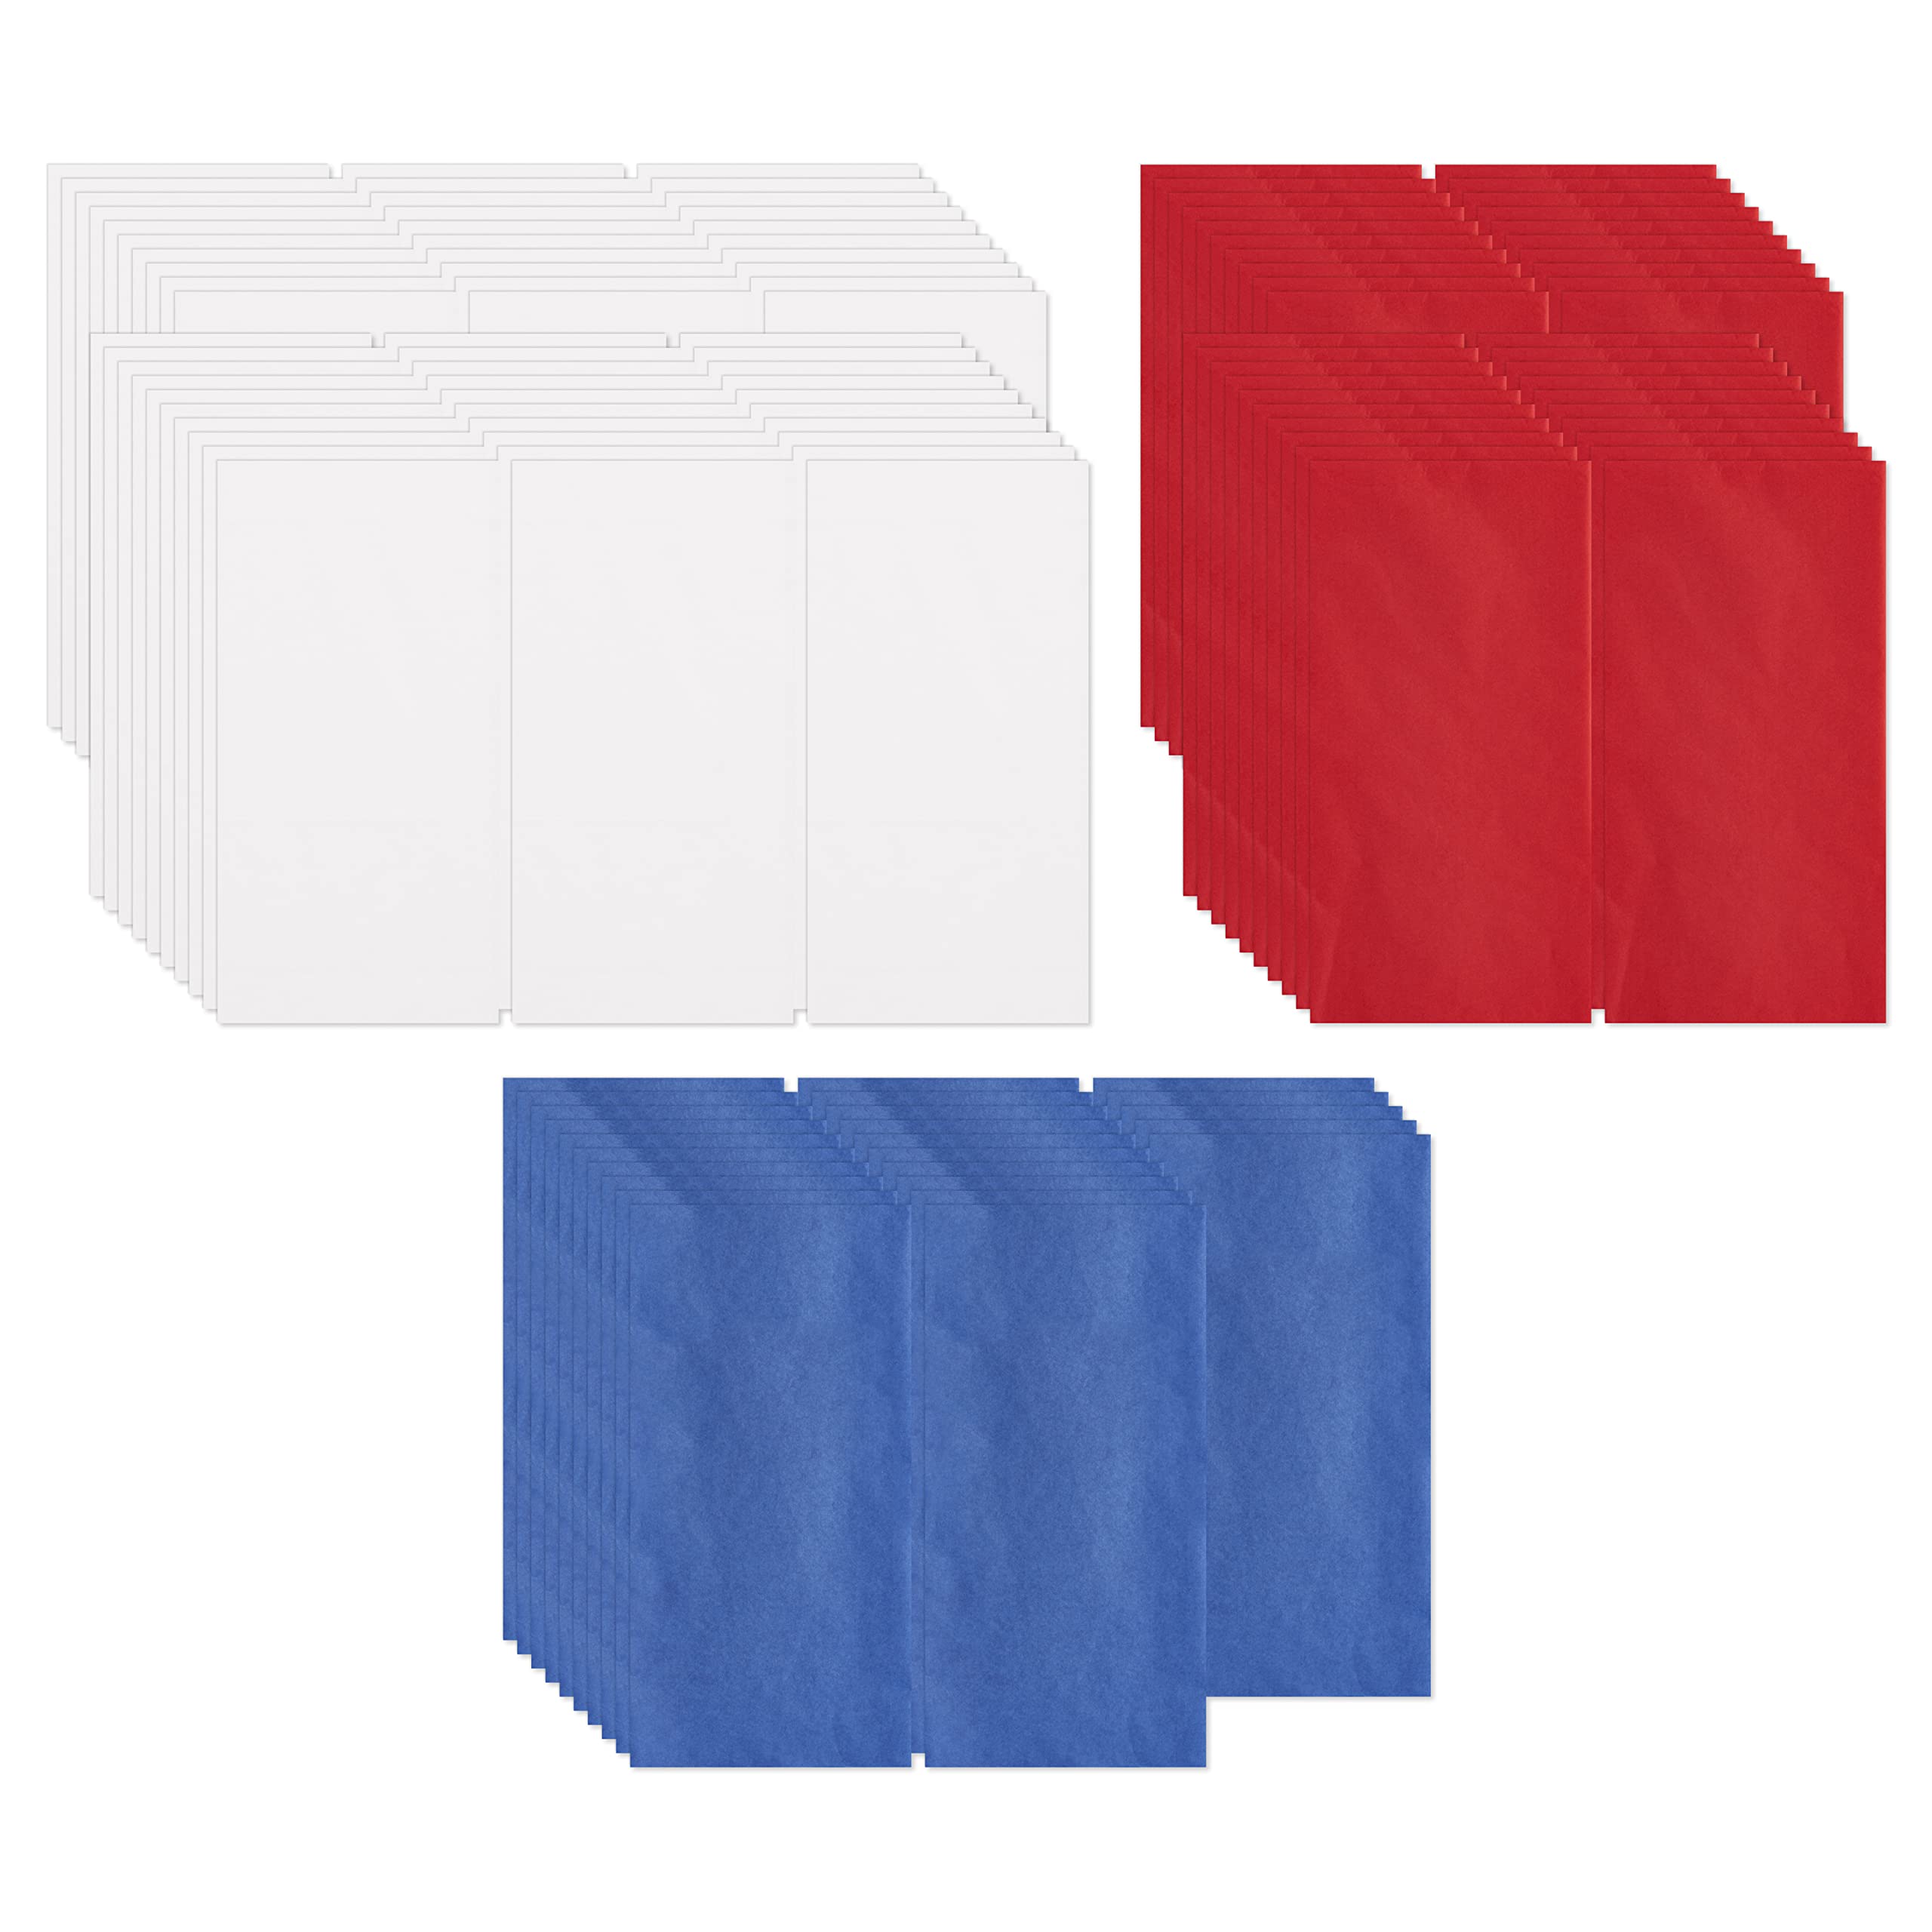 American Greetings 125 Sheets 20 in. x 20 in. Bulk Red, White, and Blue Tissue Paper for Birthdays, Holidays and All Occasions